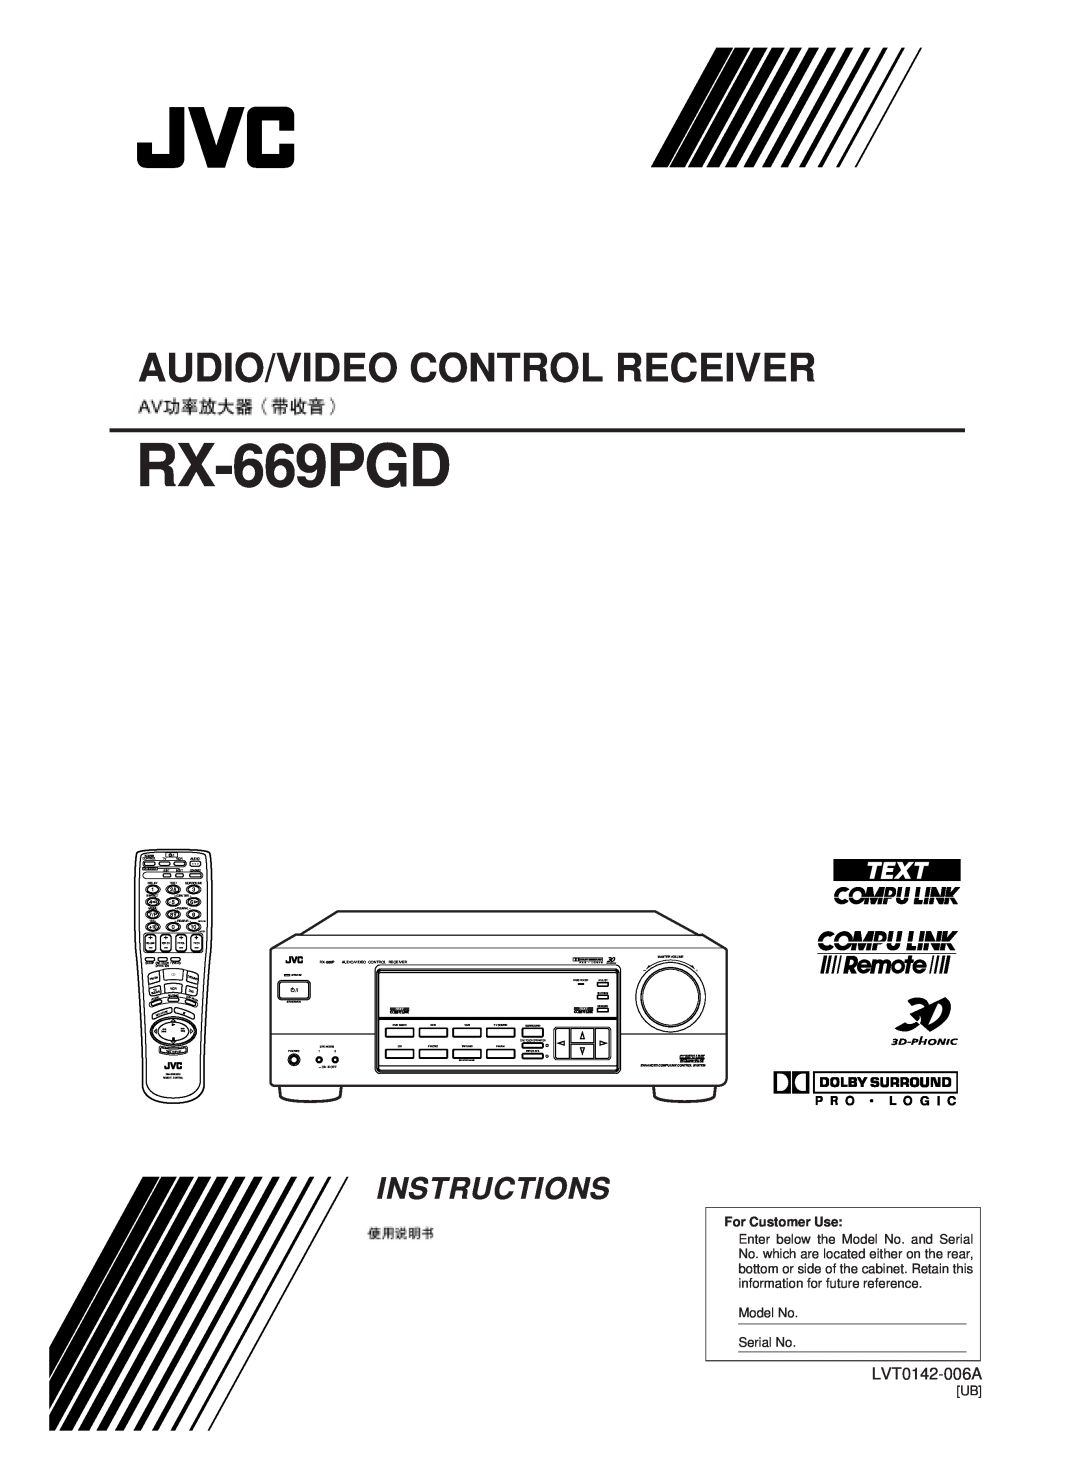 JVC RX-669PGD manual Audio/Video Control Receiver, Instructions, LVT0142-006A, For Customer Use 